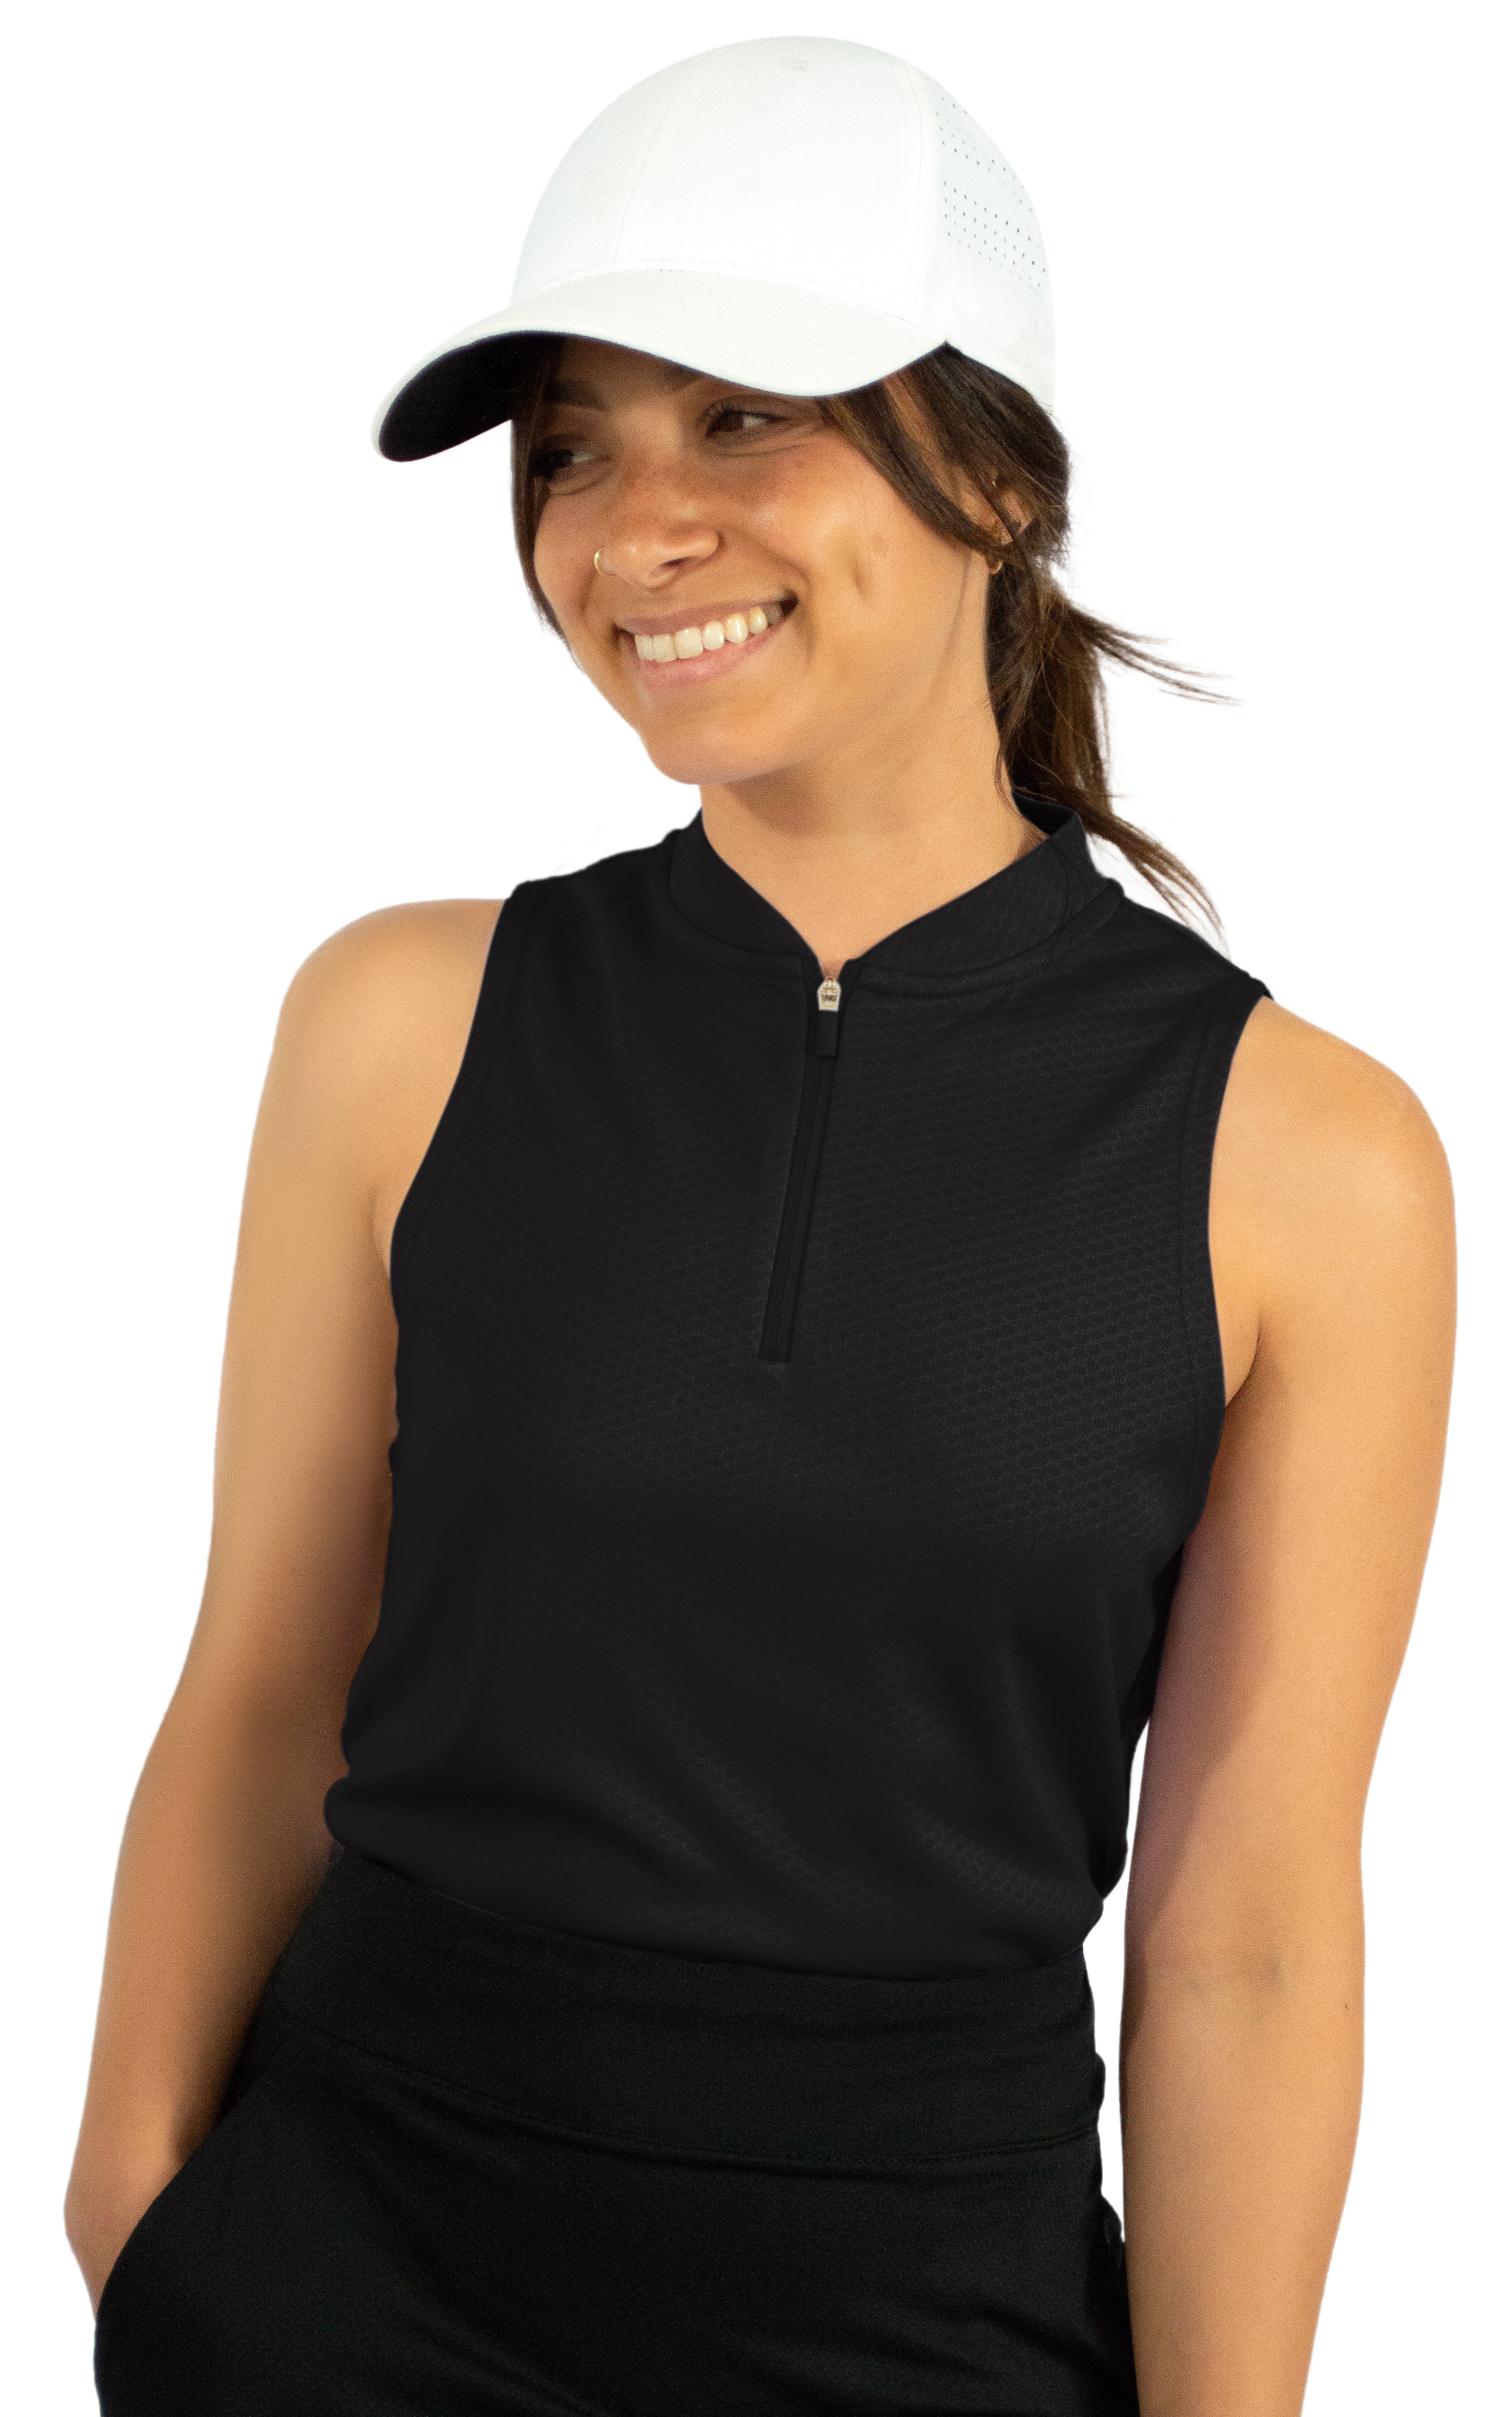 Extreme Deal - Women's Sleeveless Collarless Golf Polo with Zipper